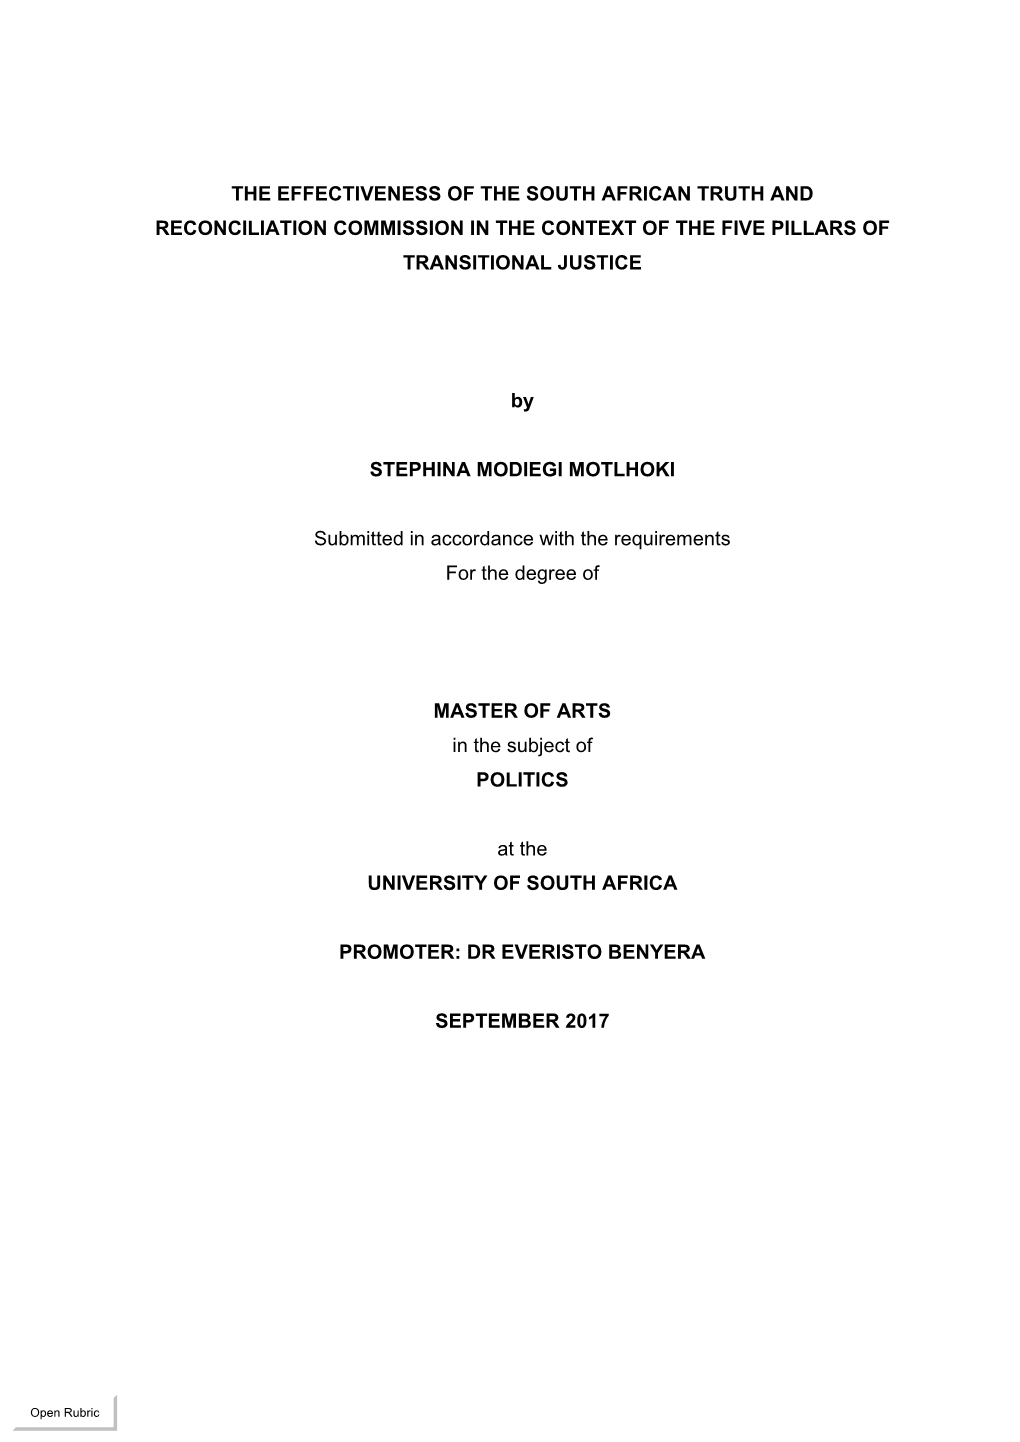 The Effectiveness of the South African Truth and Reconciliation Commission in the Context of the Five Pillars of Transitional Justice